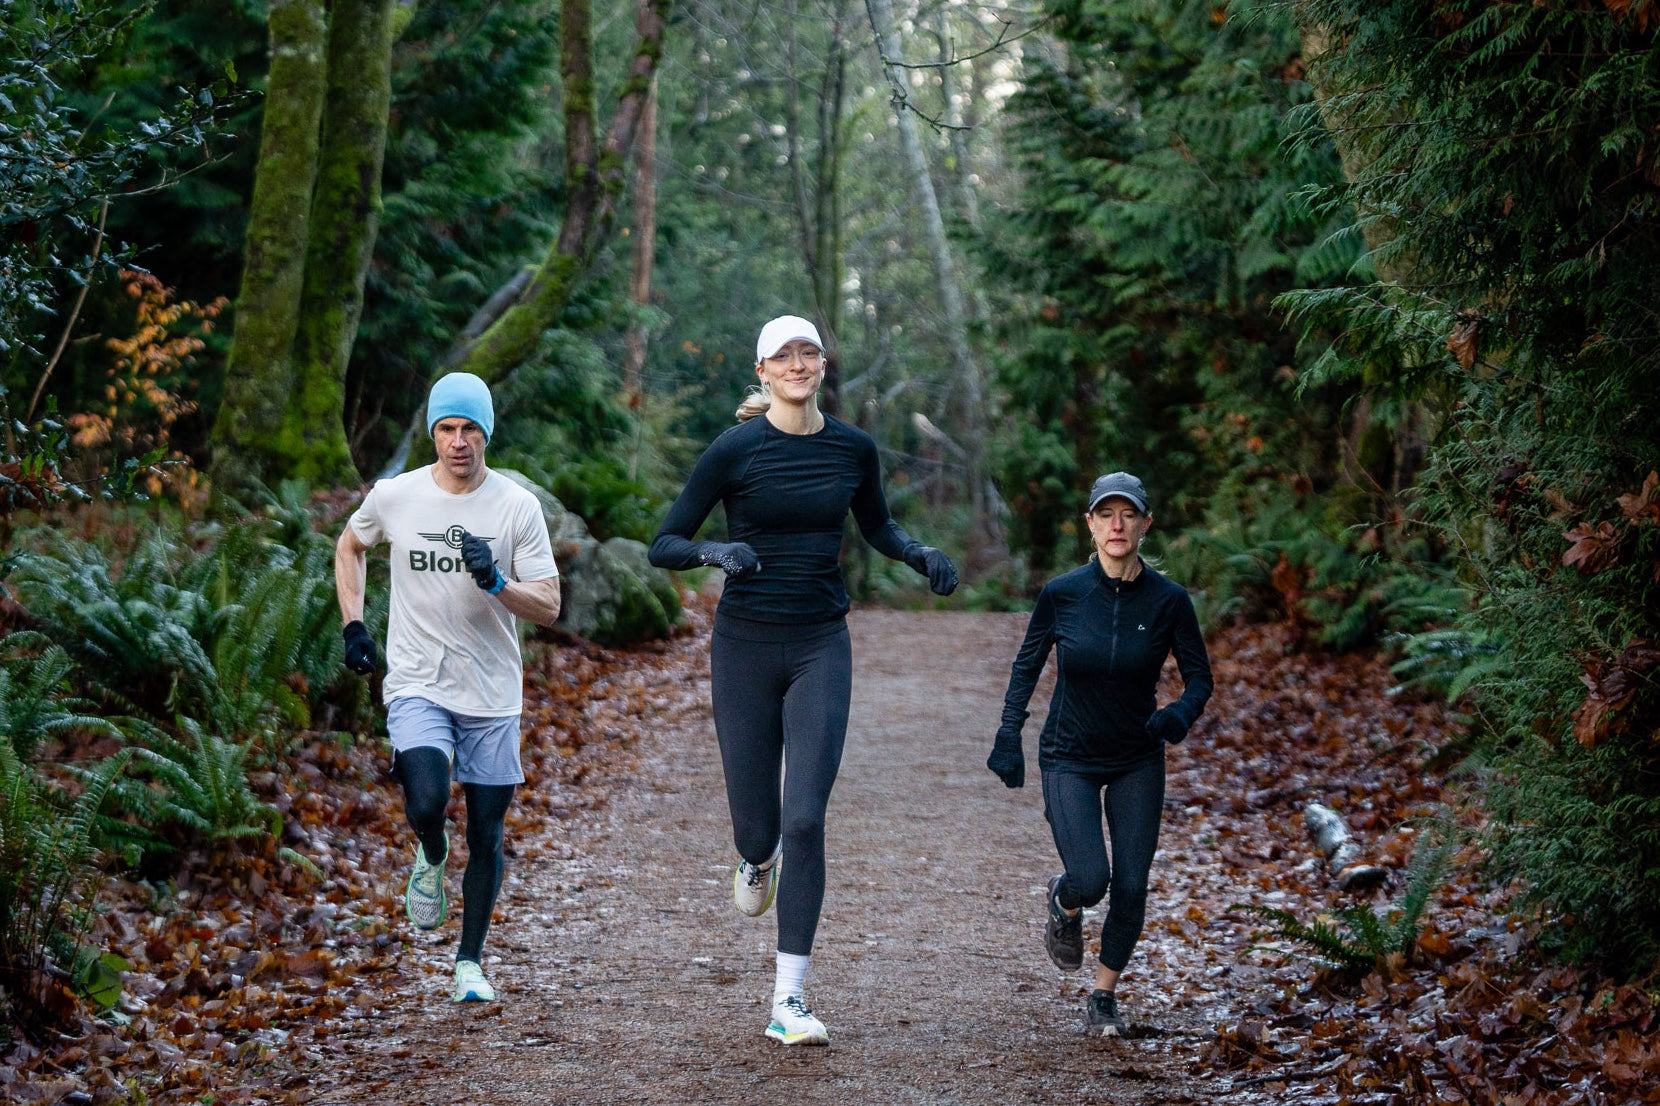 A group of three runners on a trail